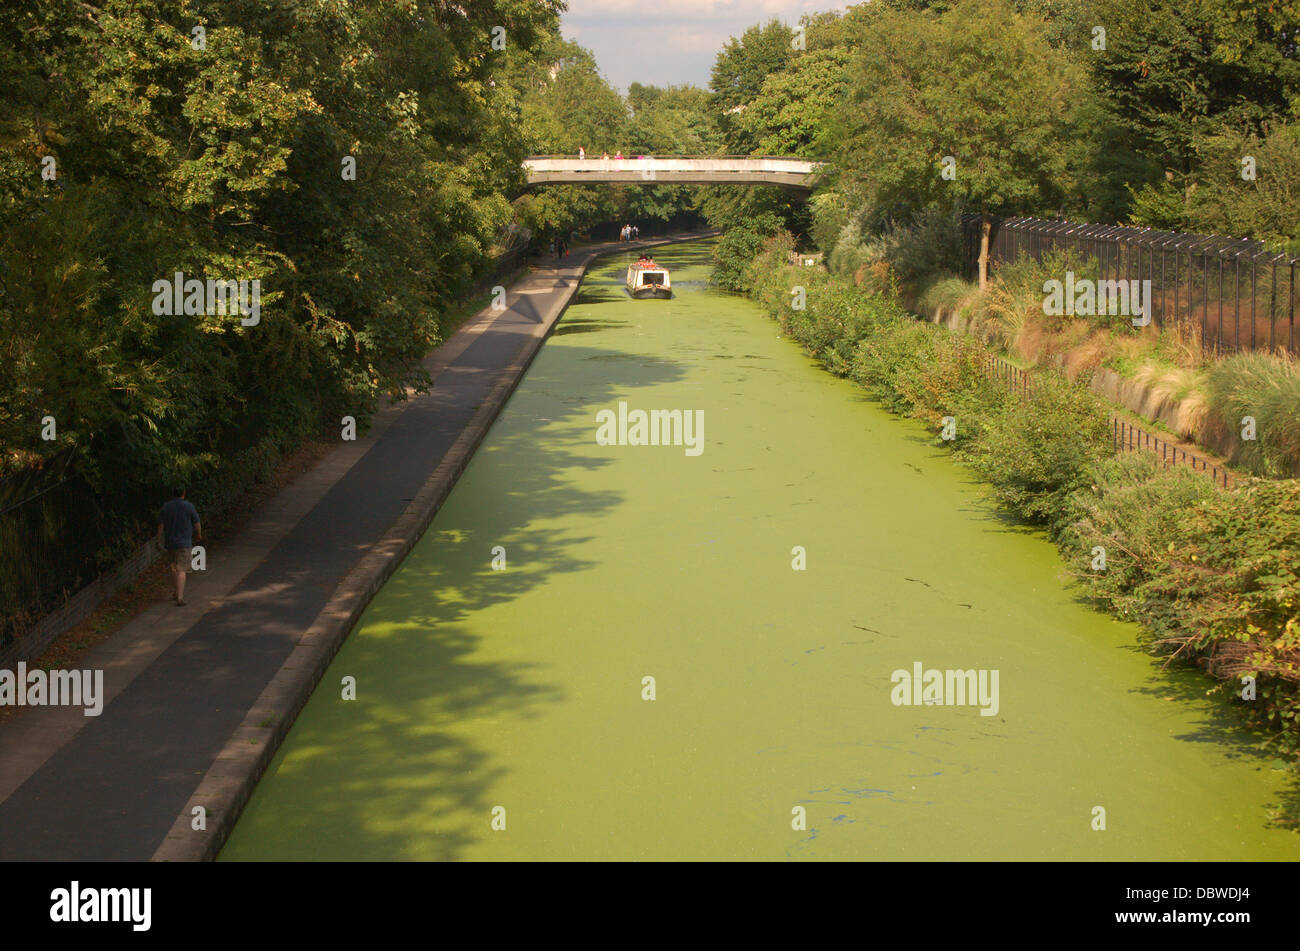 Toxic green algae on the Regents Canal in London, England Stock Photo